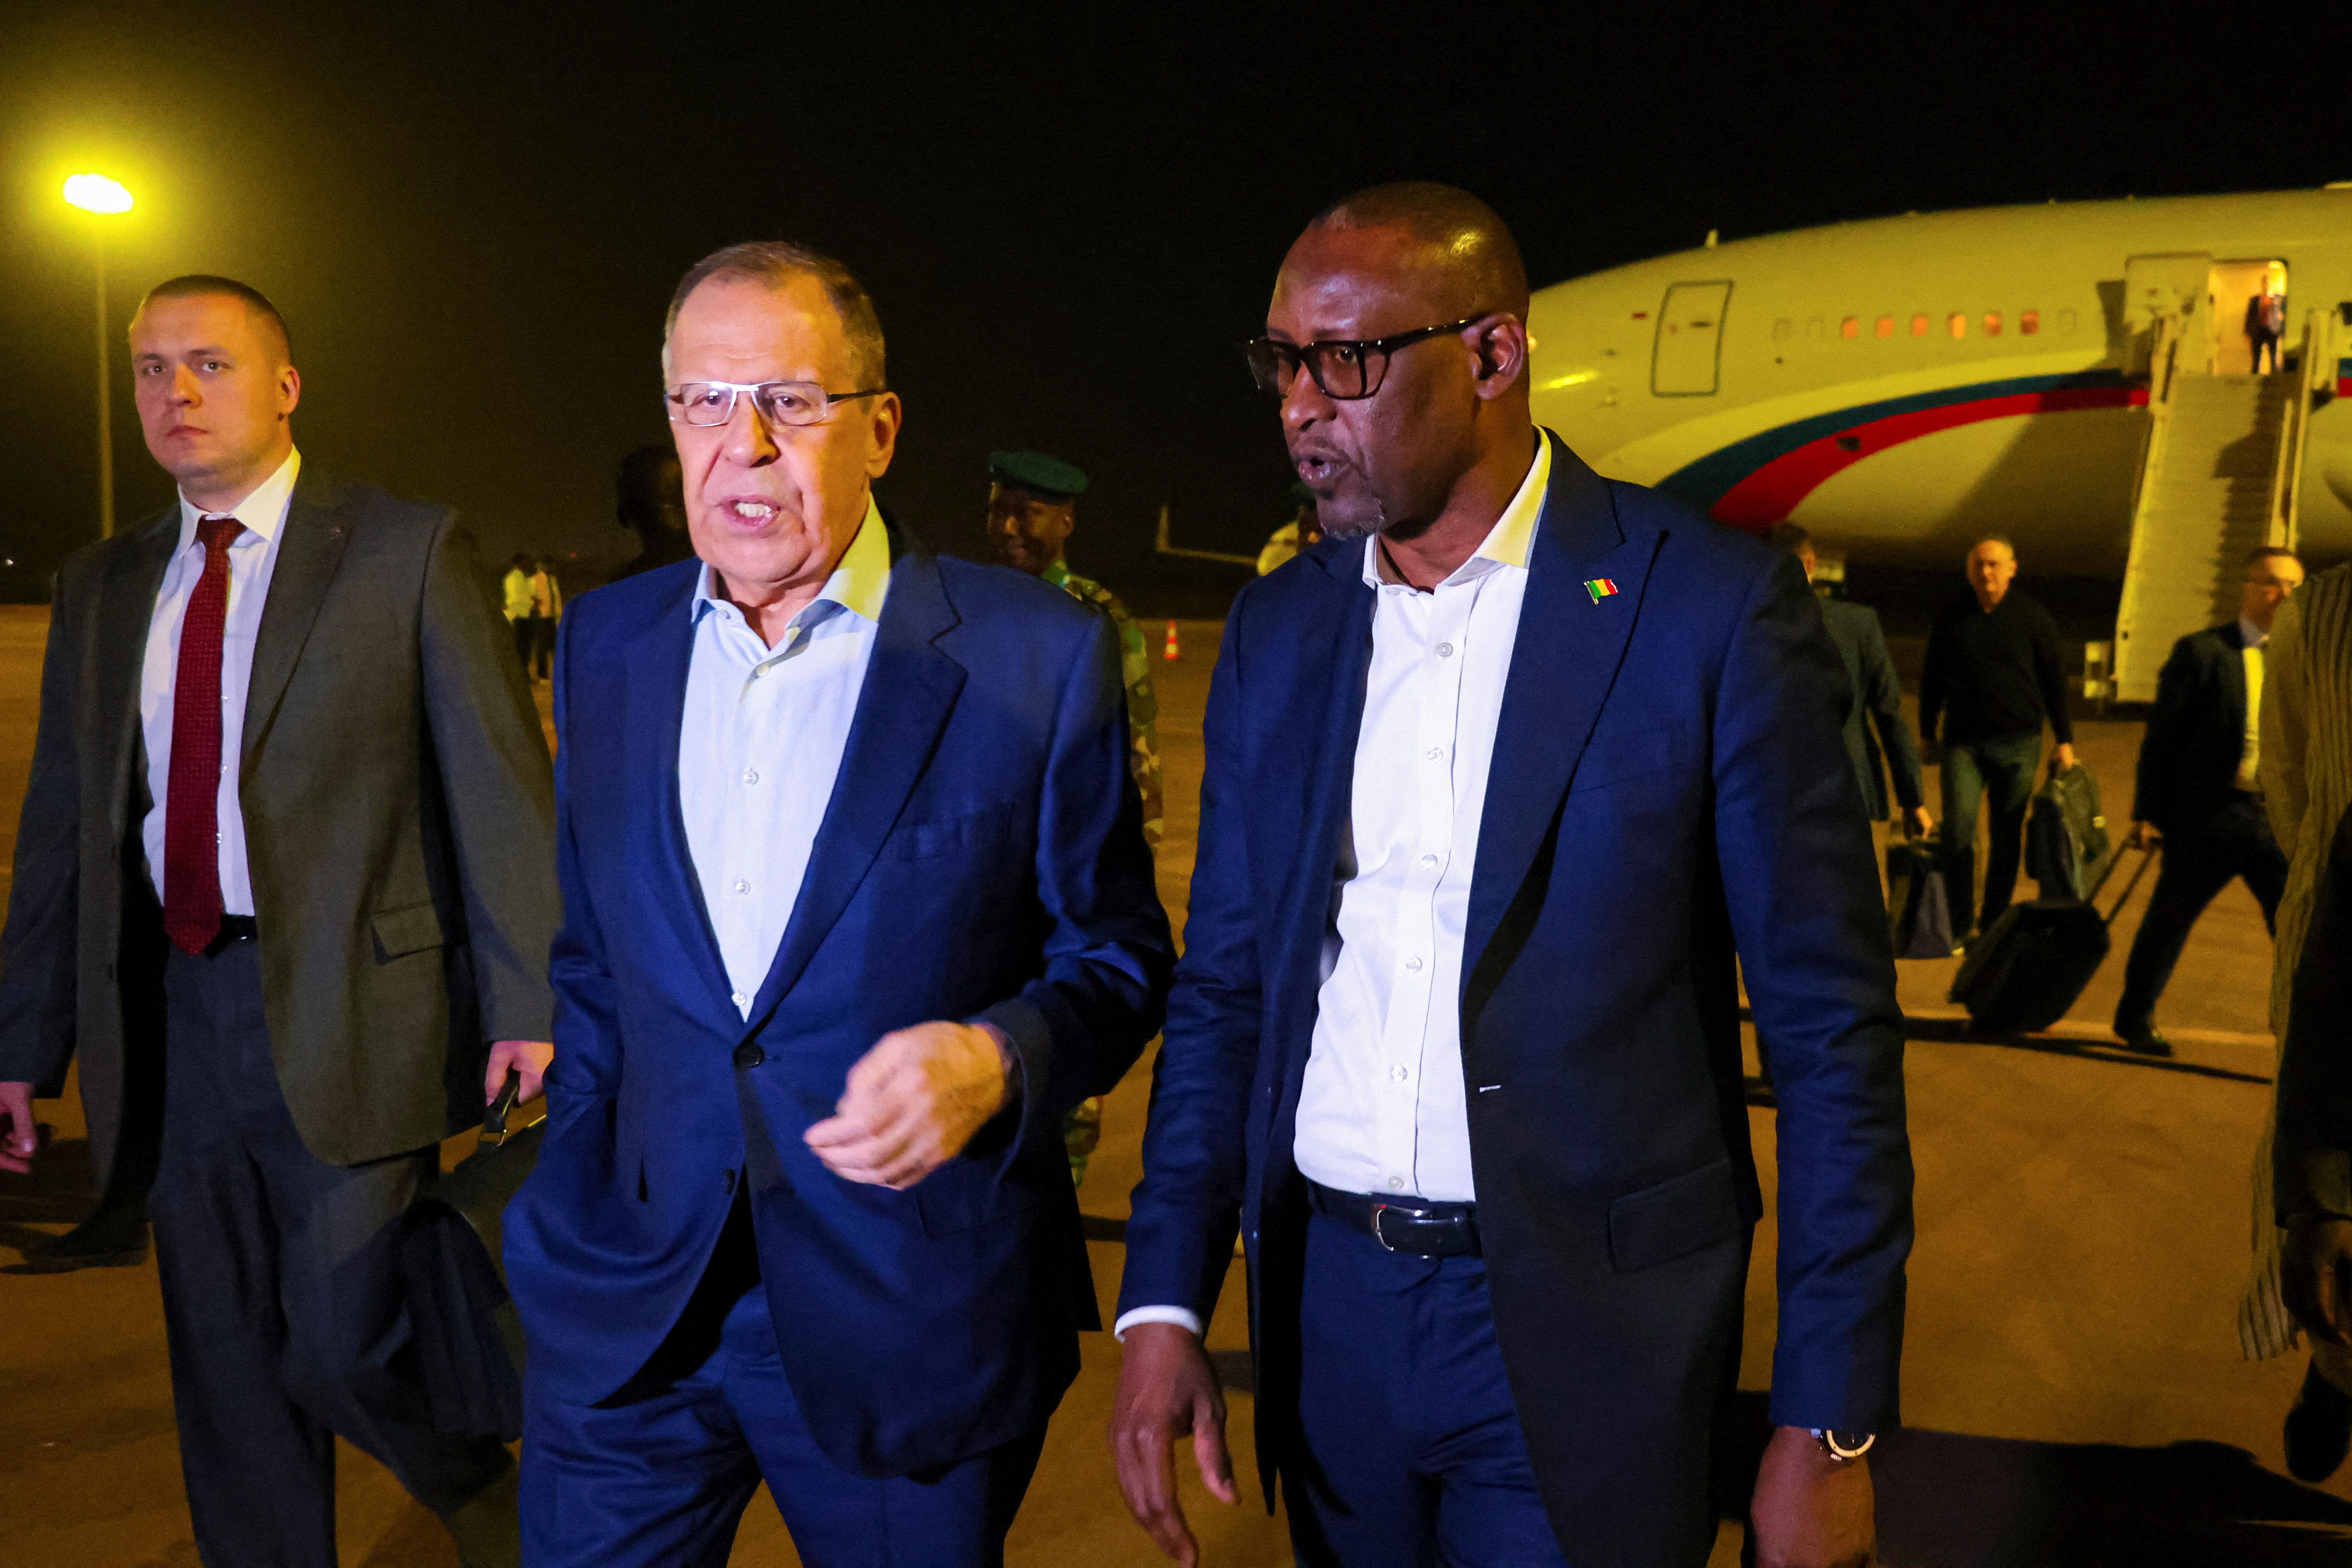 Russian foreign minister Lavrov visits Mali